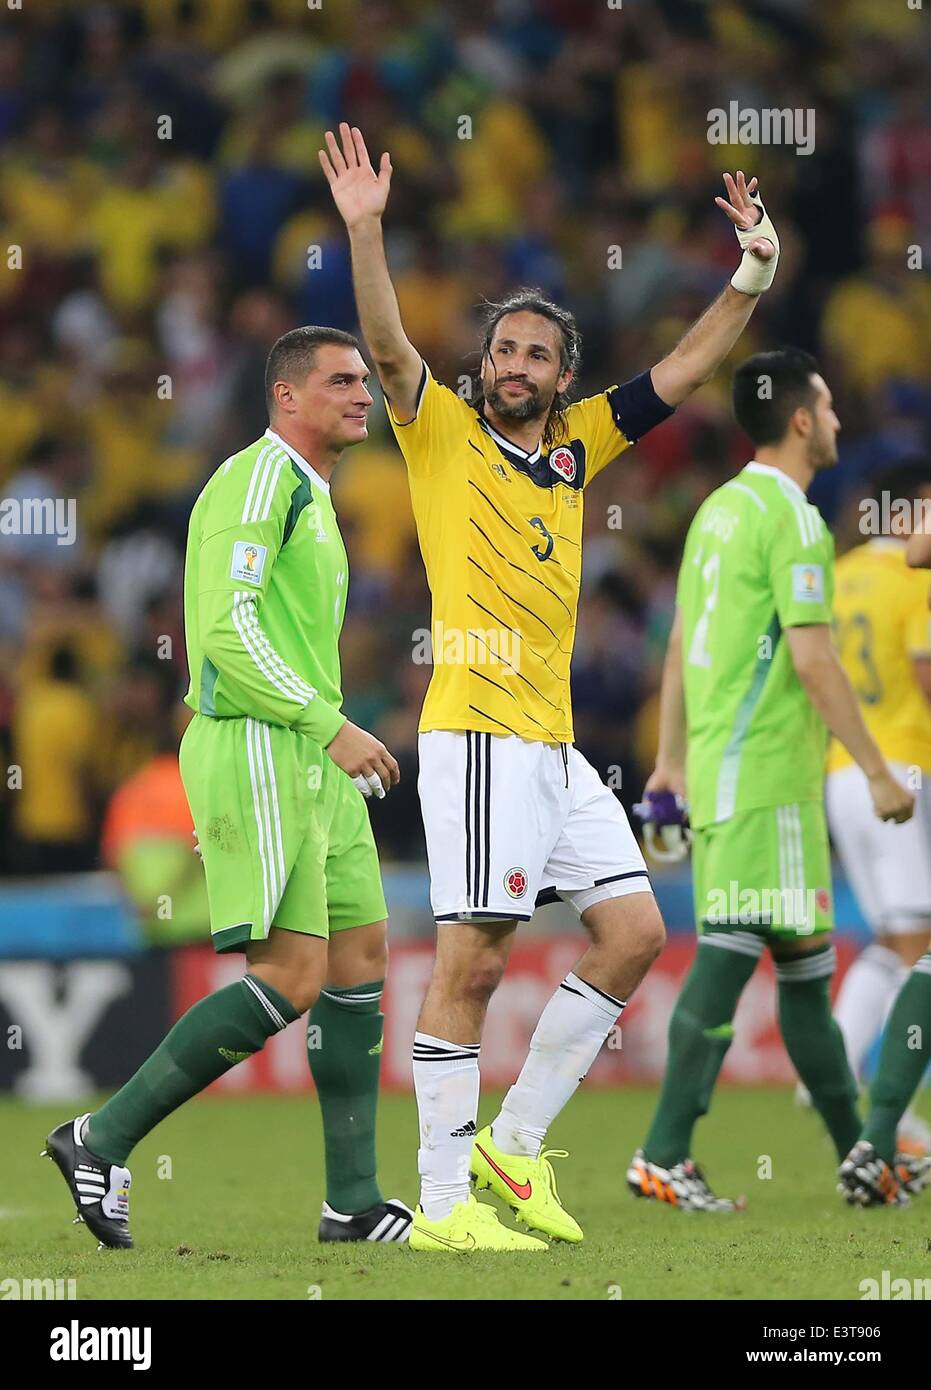 Rio De Janeiro, Brazil. 28th June, 2014. Colombia's Mario Yepes (C) greets the fans after a Round of 16 match between Colombia and Uruguay of 2014 FIFA World Cup at the Estadio do Maracana Stadium in Rio de Janeiro, Brazil, on June 28, 2014. Colombia won 2-0 over Uruguay on Saturday. Credit:  Xu Zijian/Xinhua/Alamy Live News Stock Photo